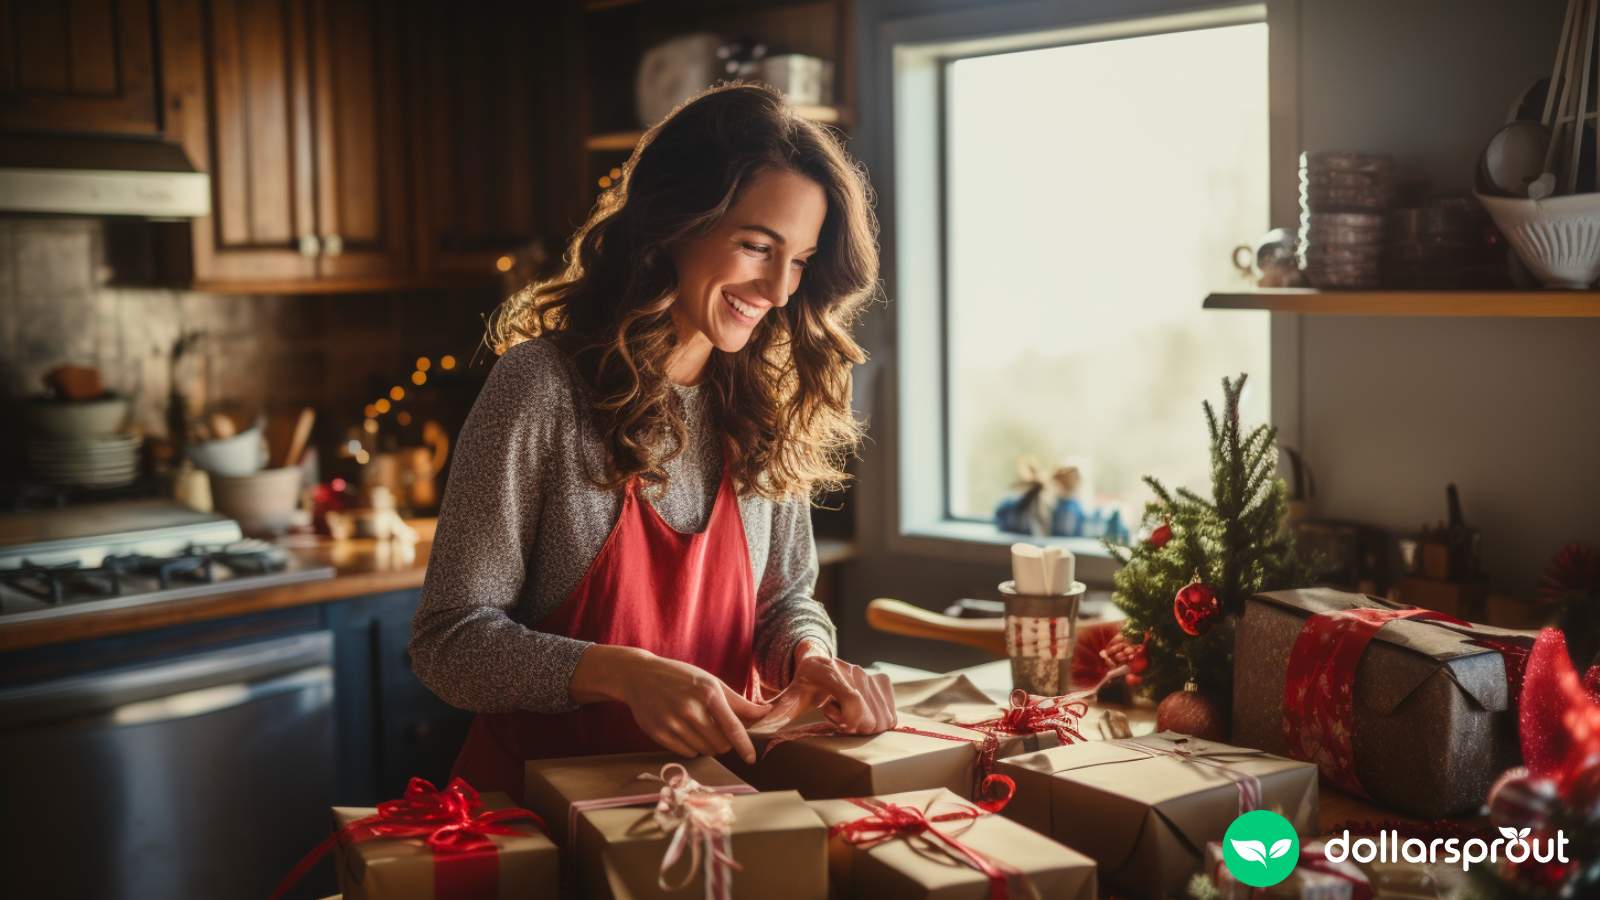 A woman wrapping Christmas presents in her kitchen.